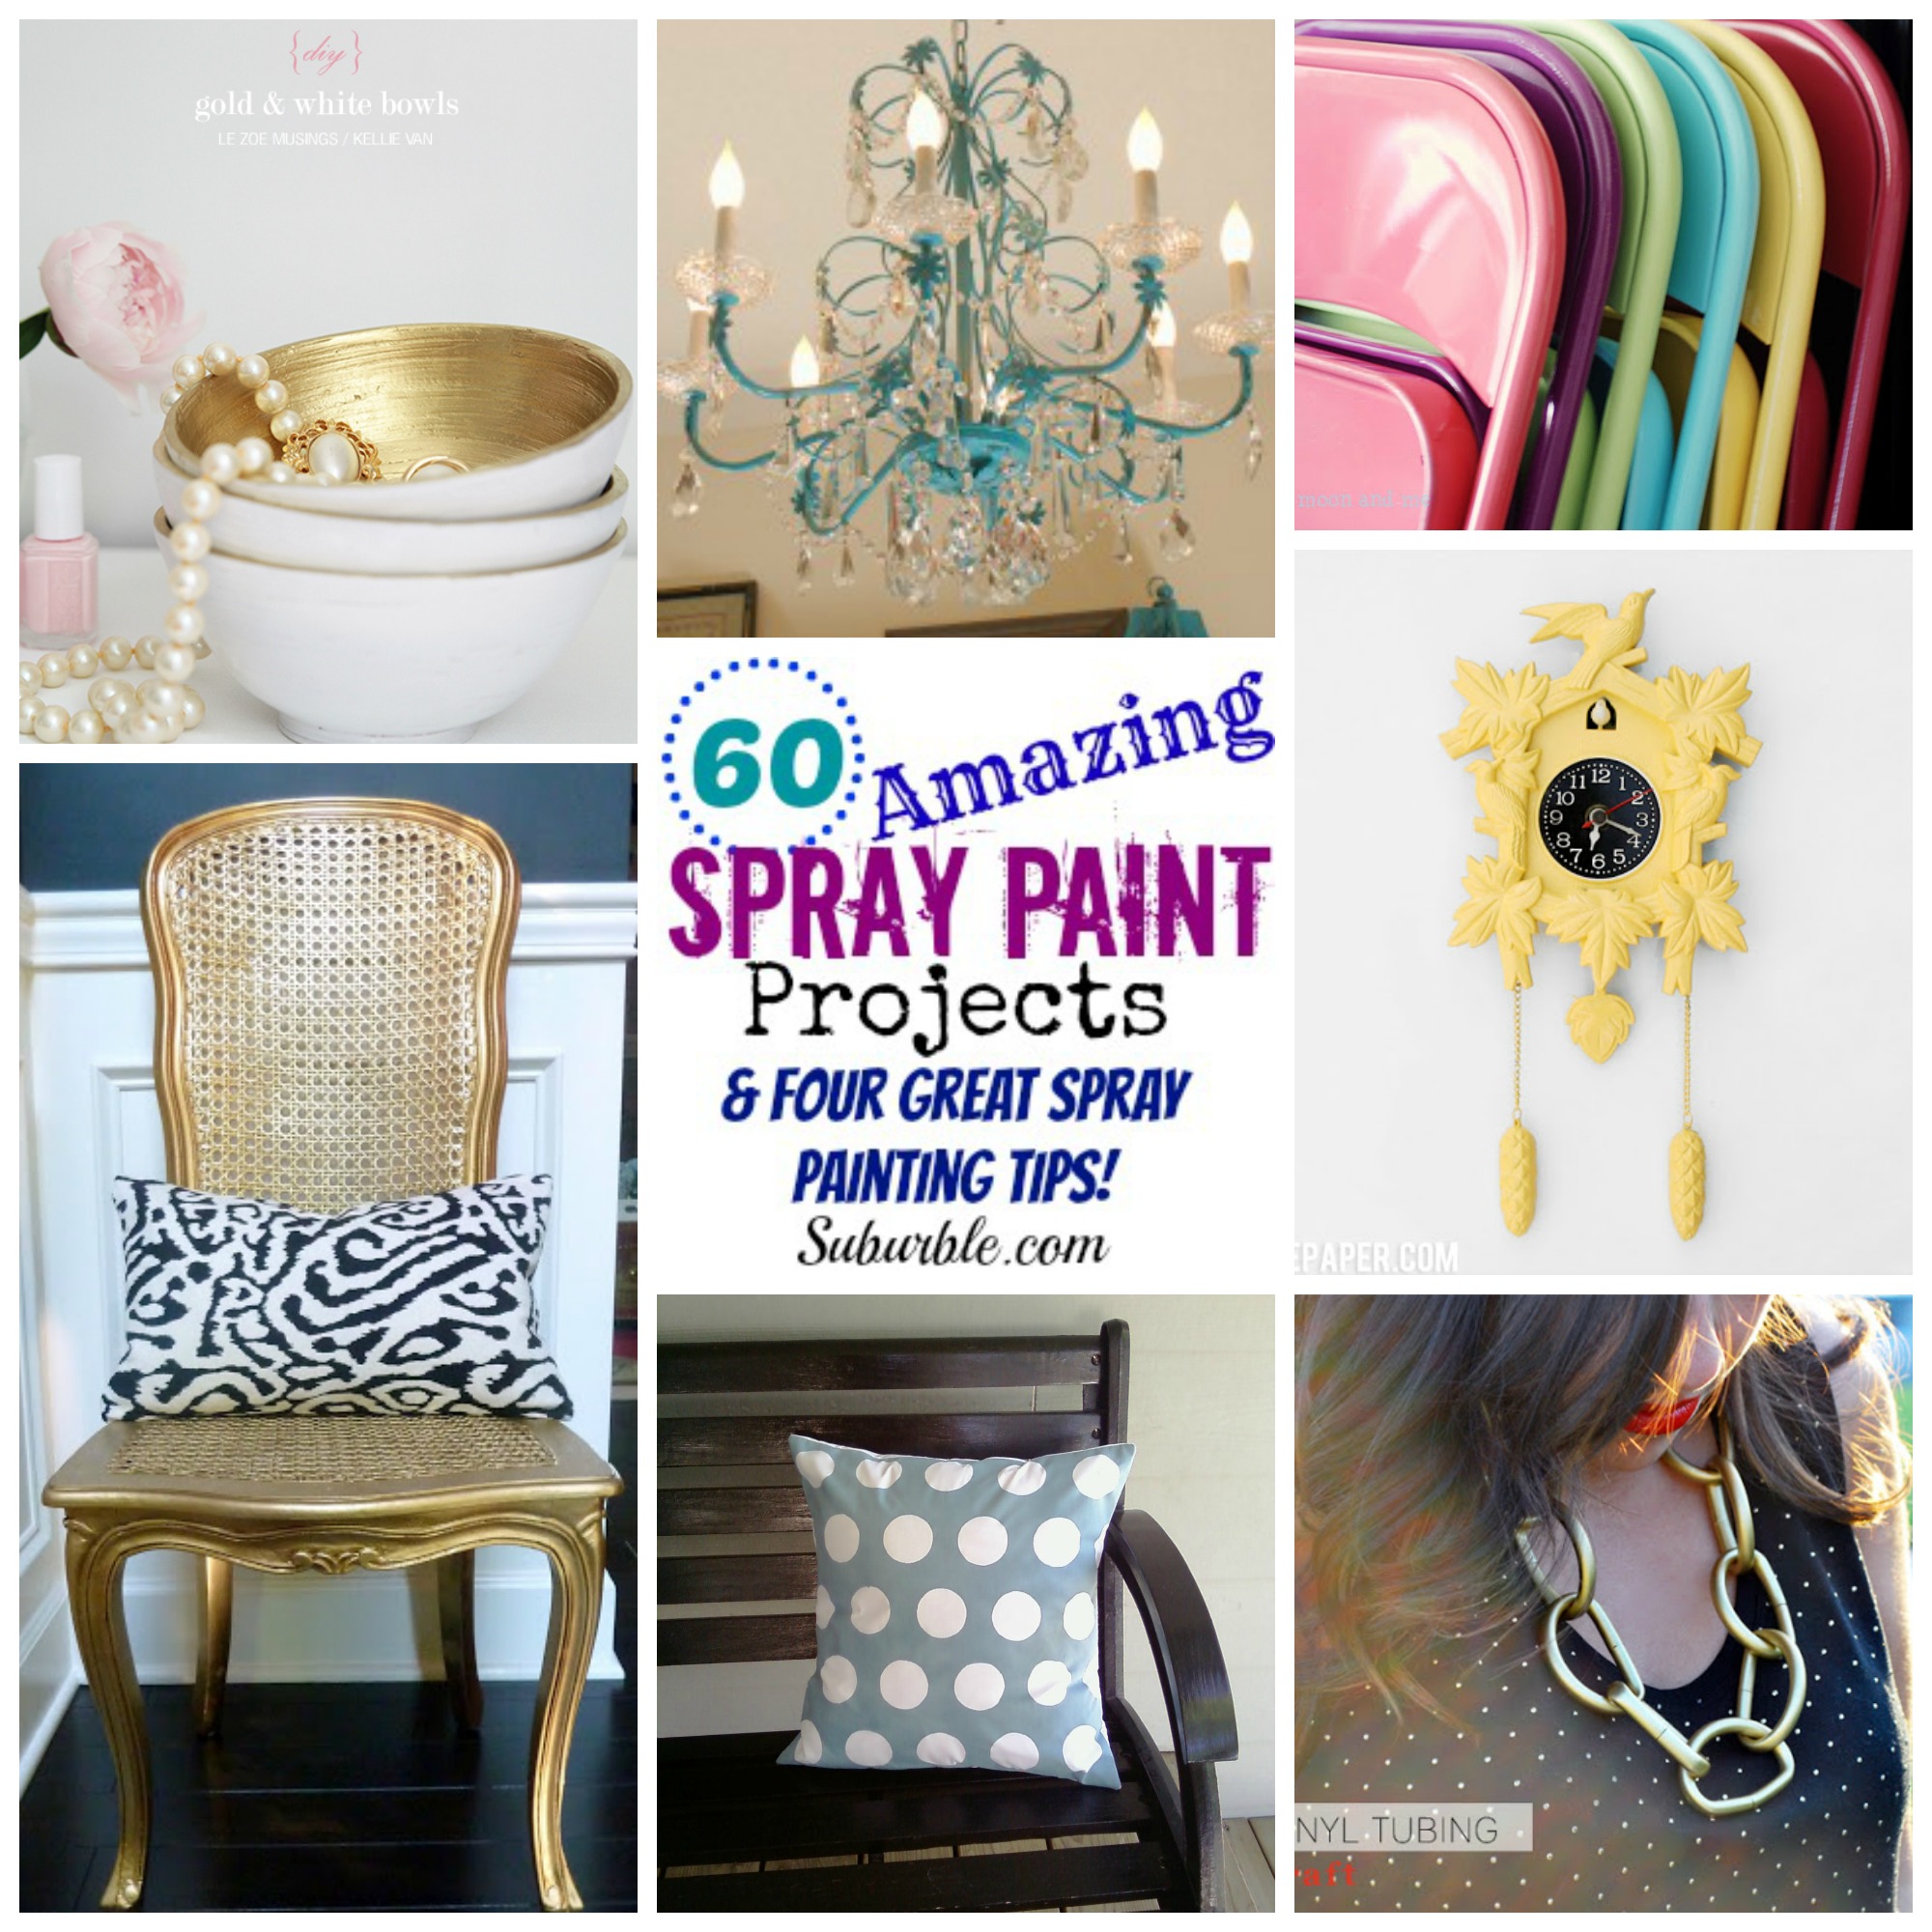 DIY: How To Spray Paint Plastic Storage - Confessions Of A DIY Addict